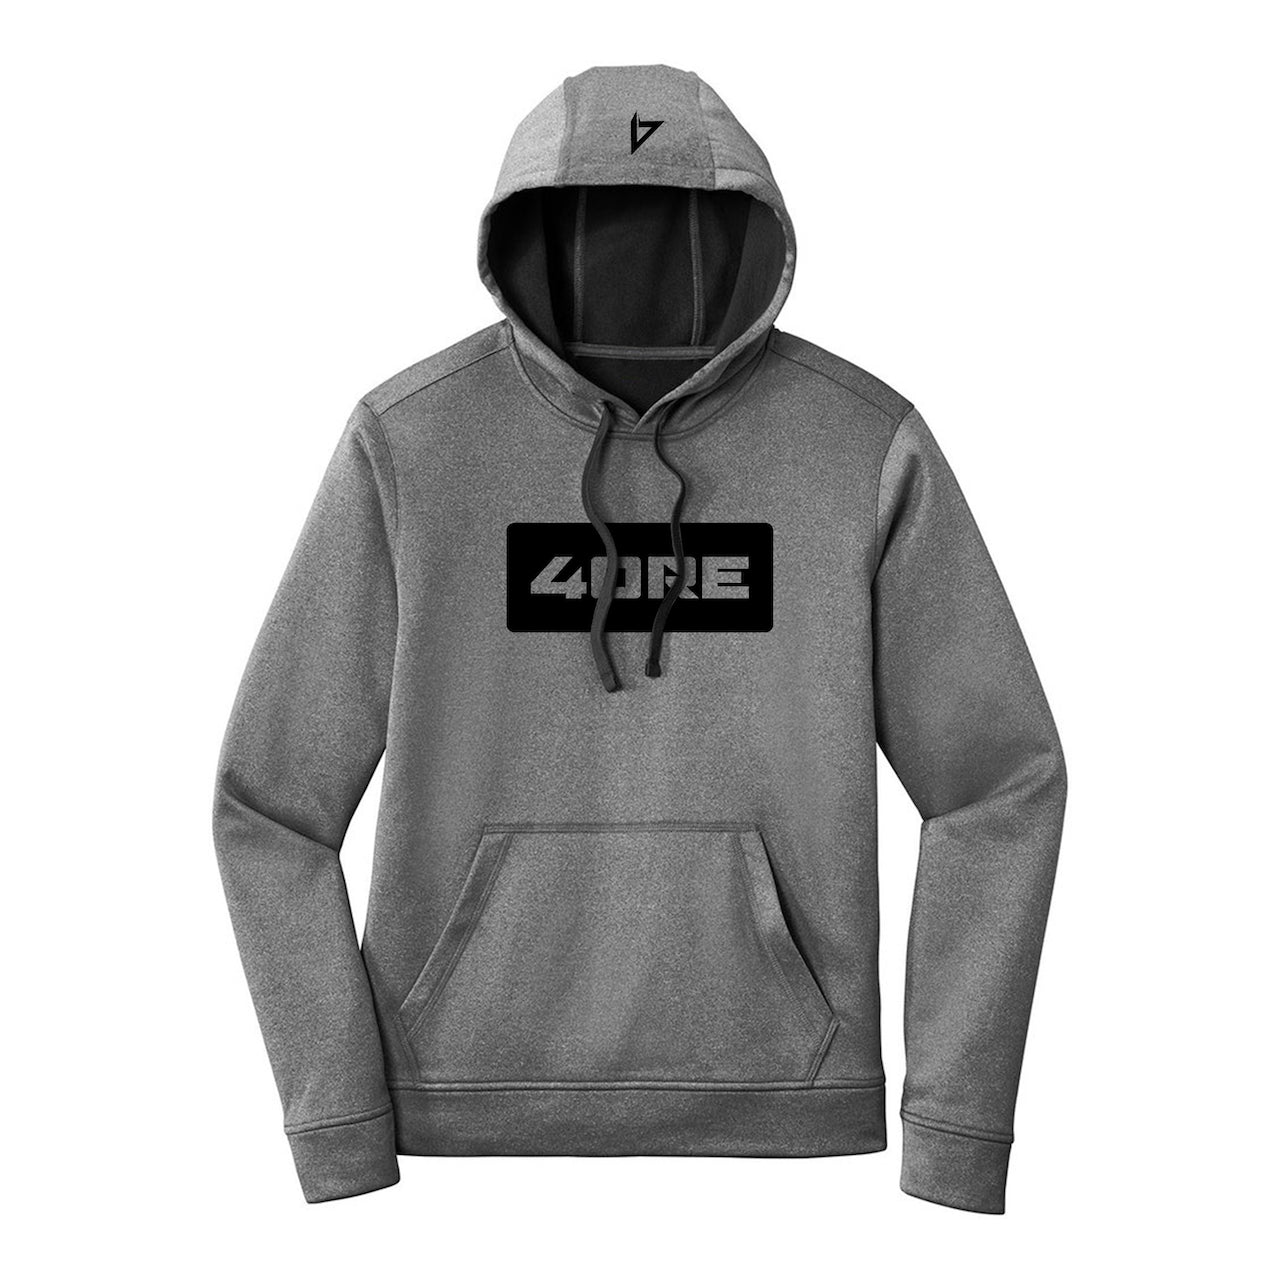 HOODIE EDITION 4ORE [GRAY] LIMITED NUTRITION – 4ORE TOUR